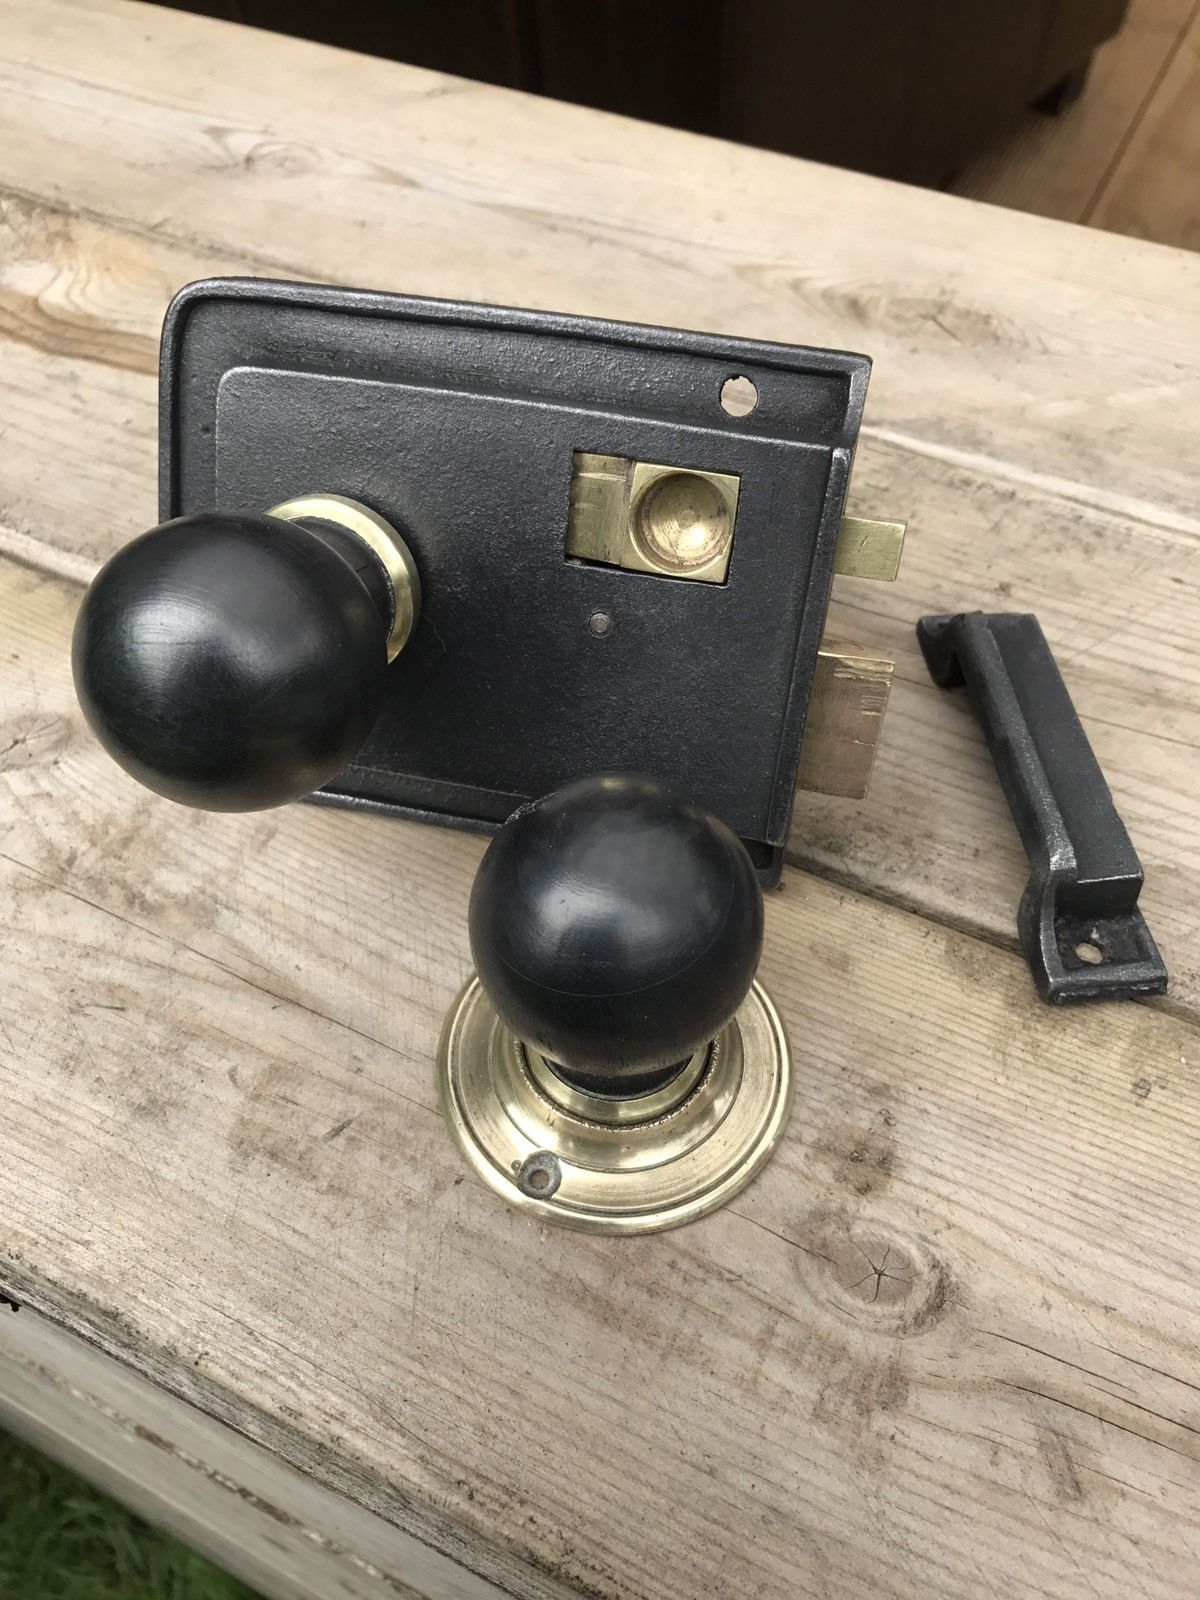 Reclaimed Vintage Cast Iron Rim Lock, Wooden Knobs And Keep